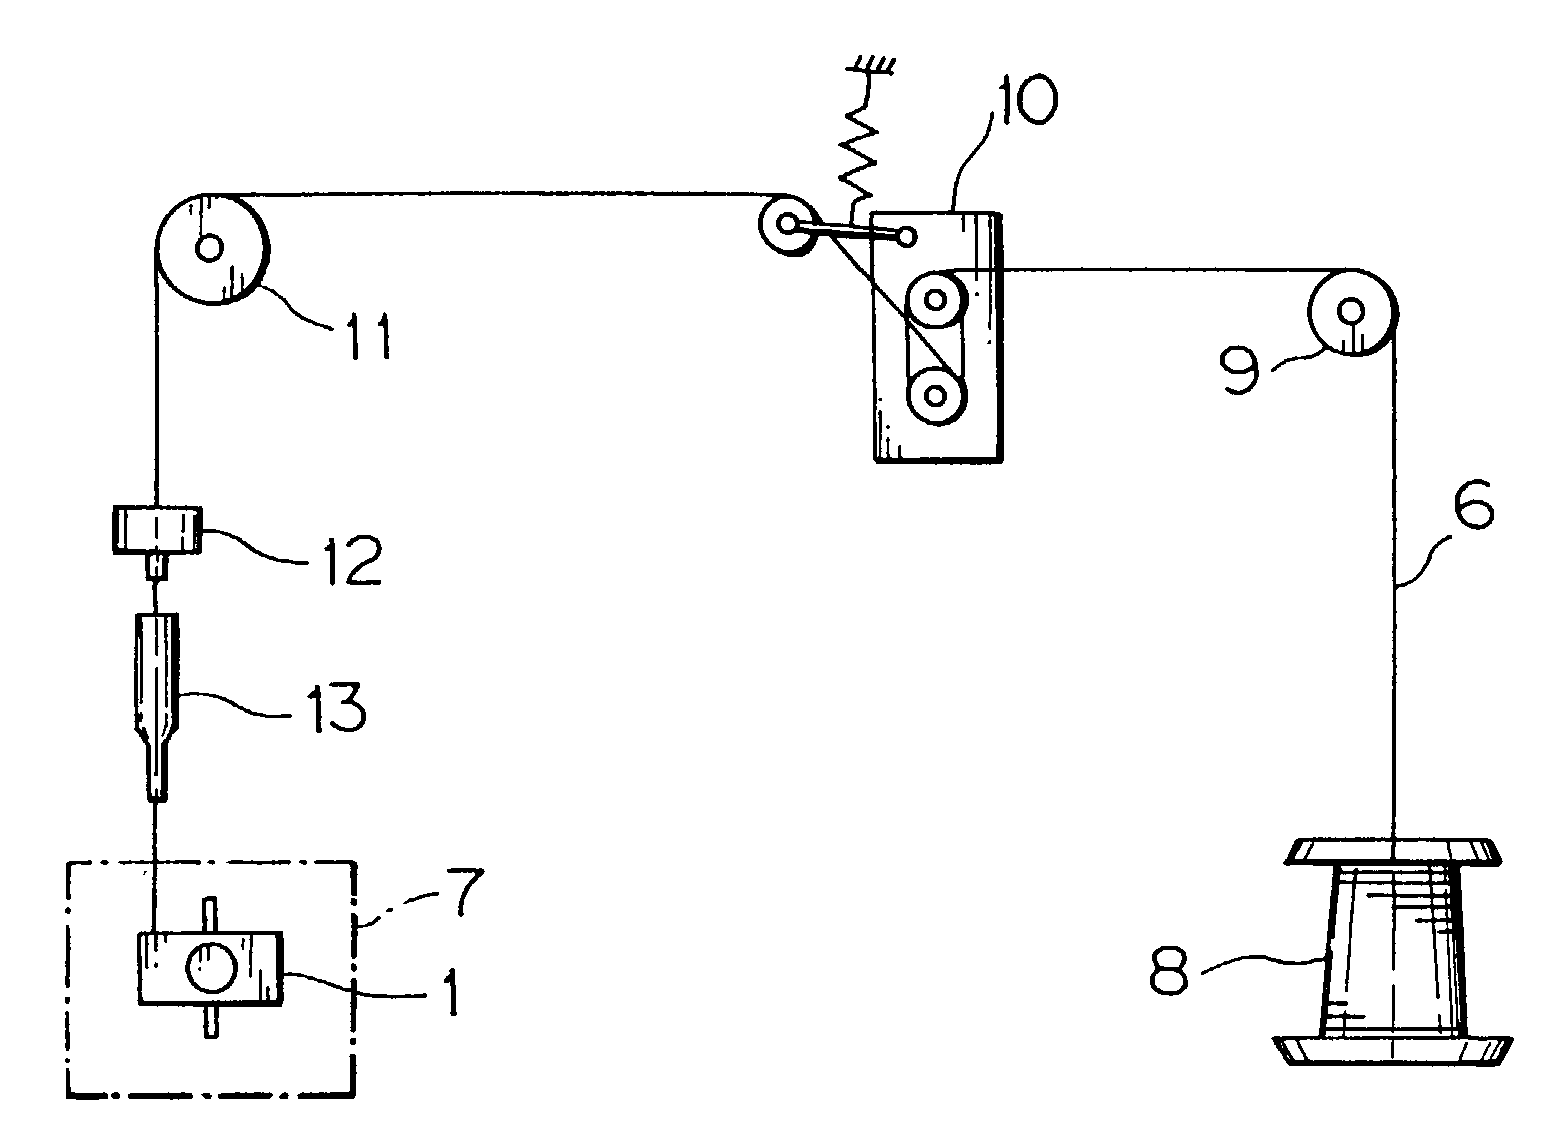 Process for treating coil end upon winding of coil